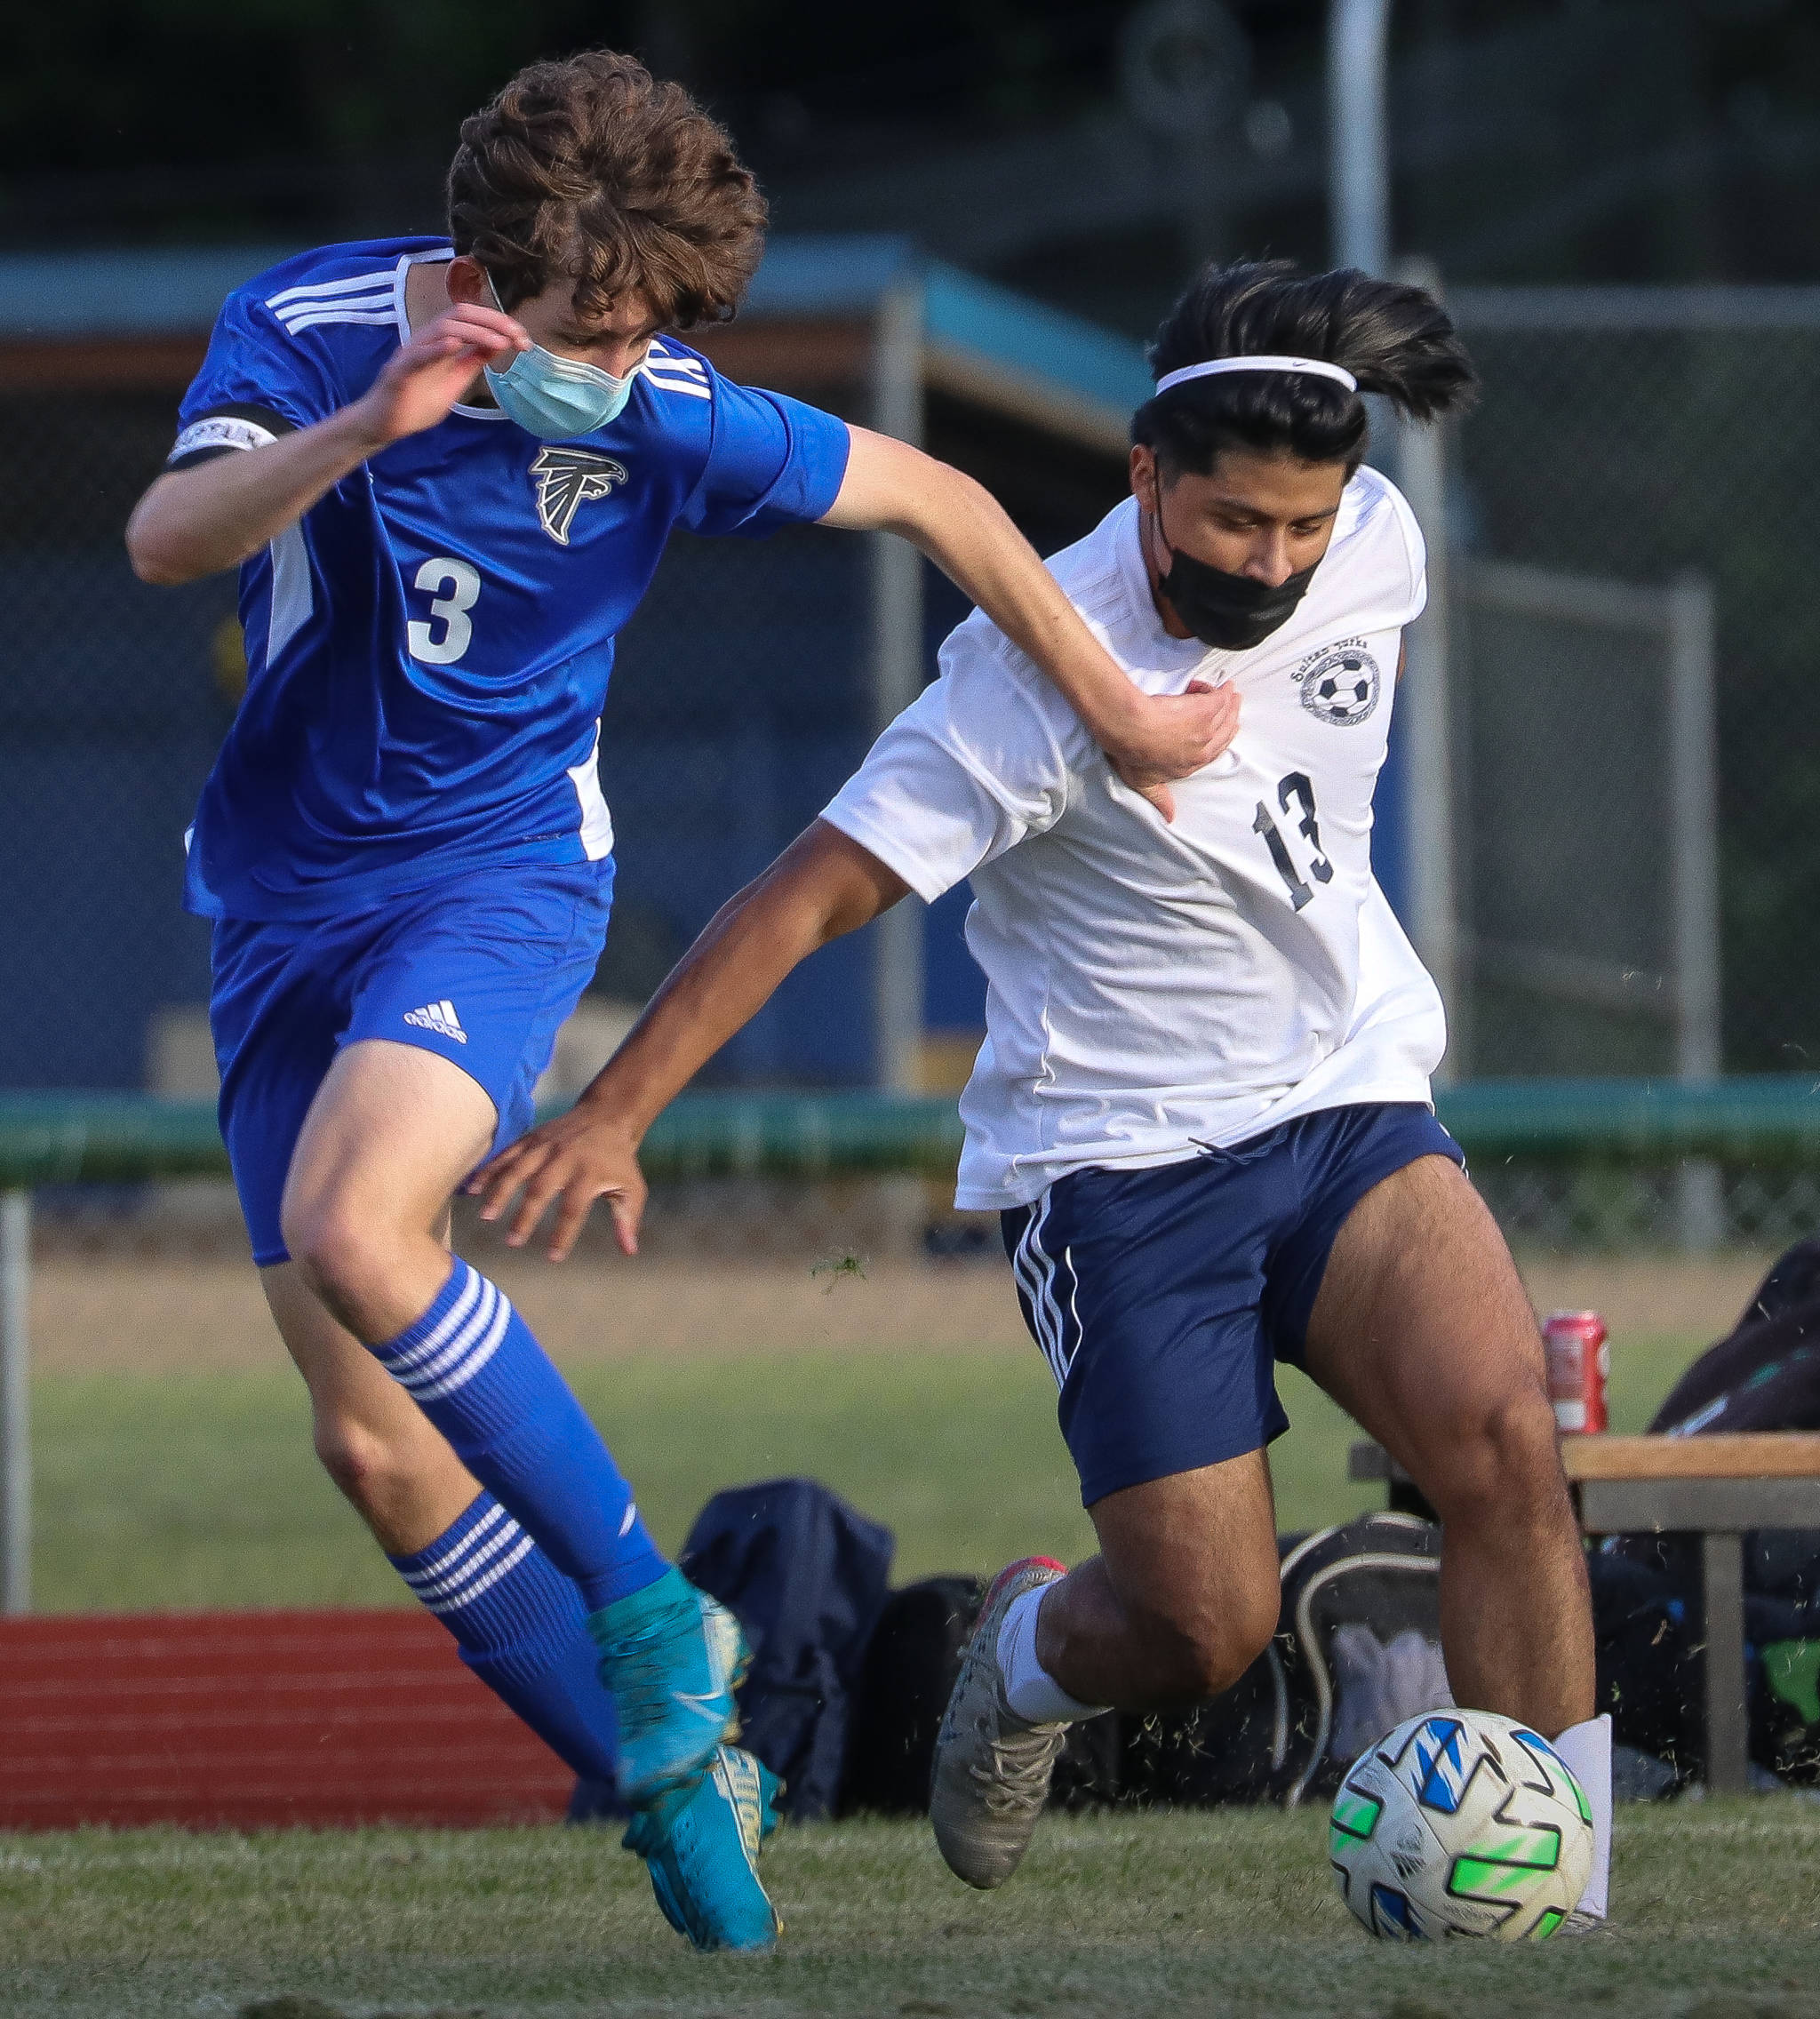 Photo by Matt Simms
South Whidbey vs. Sultan at Waterman Field May 11, 2021
Midfielder and senior Aidan O’Brien,  No. 3, works his way up the right side in the first half against a defending midfielder from Sultan.